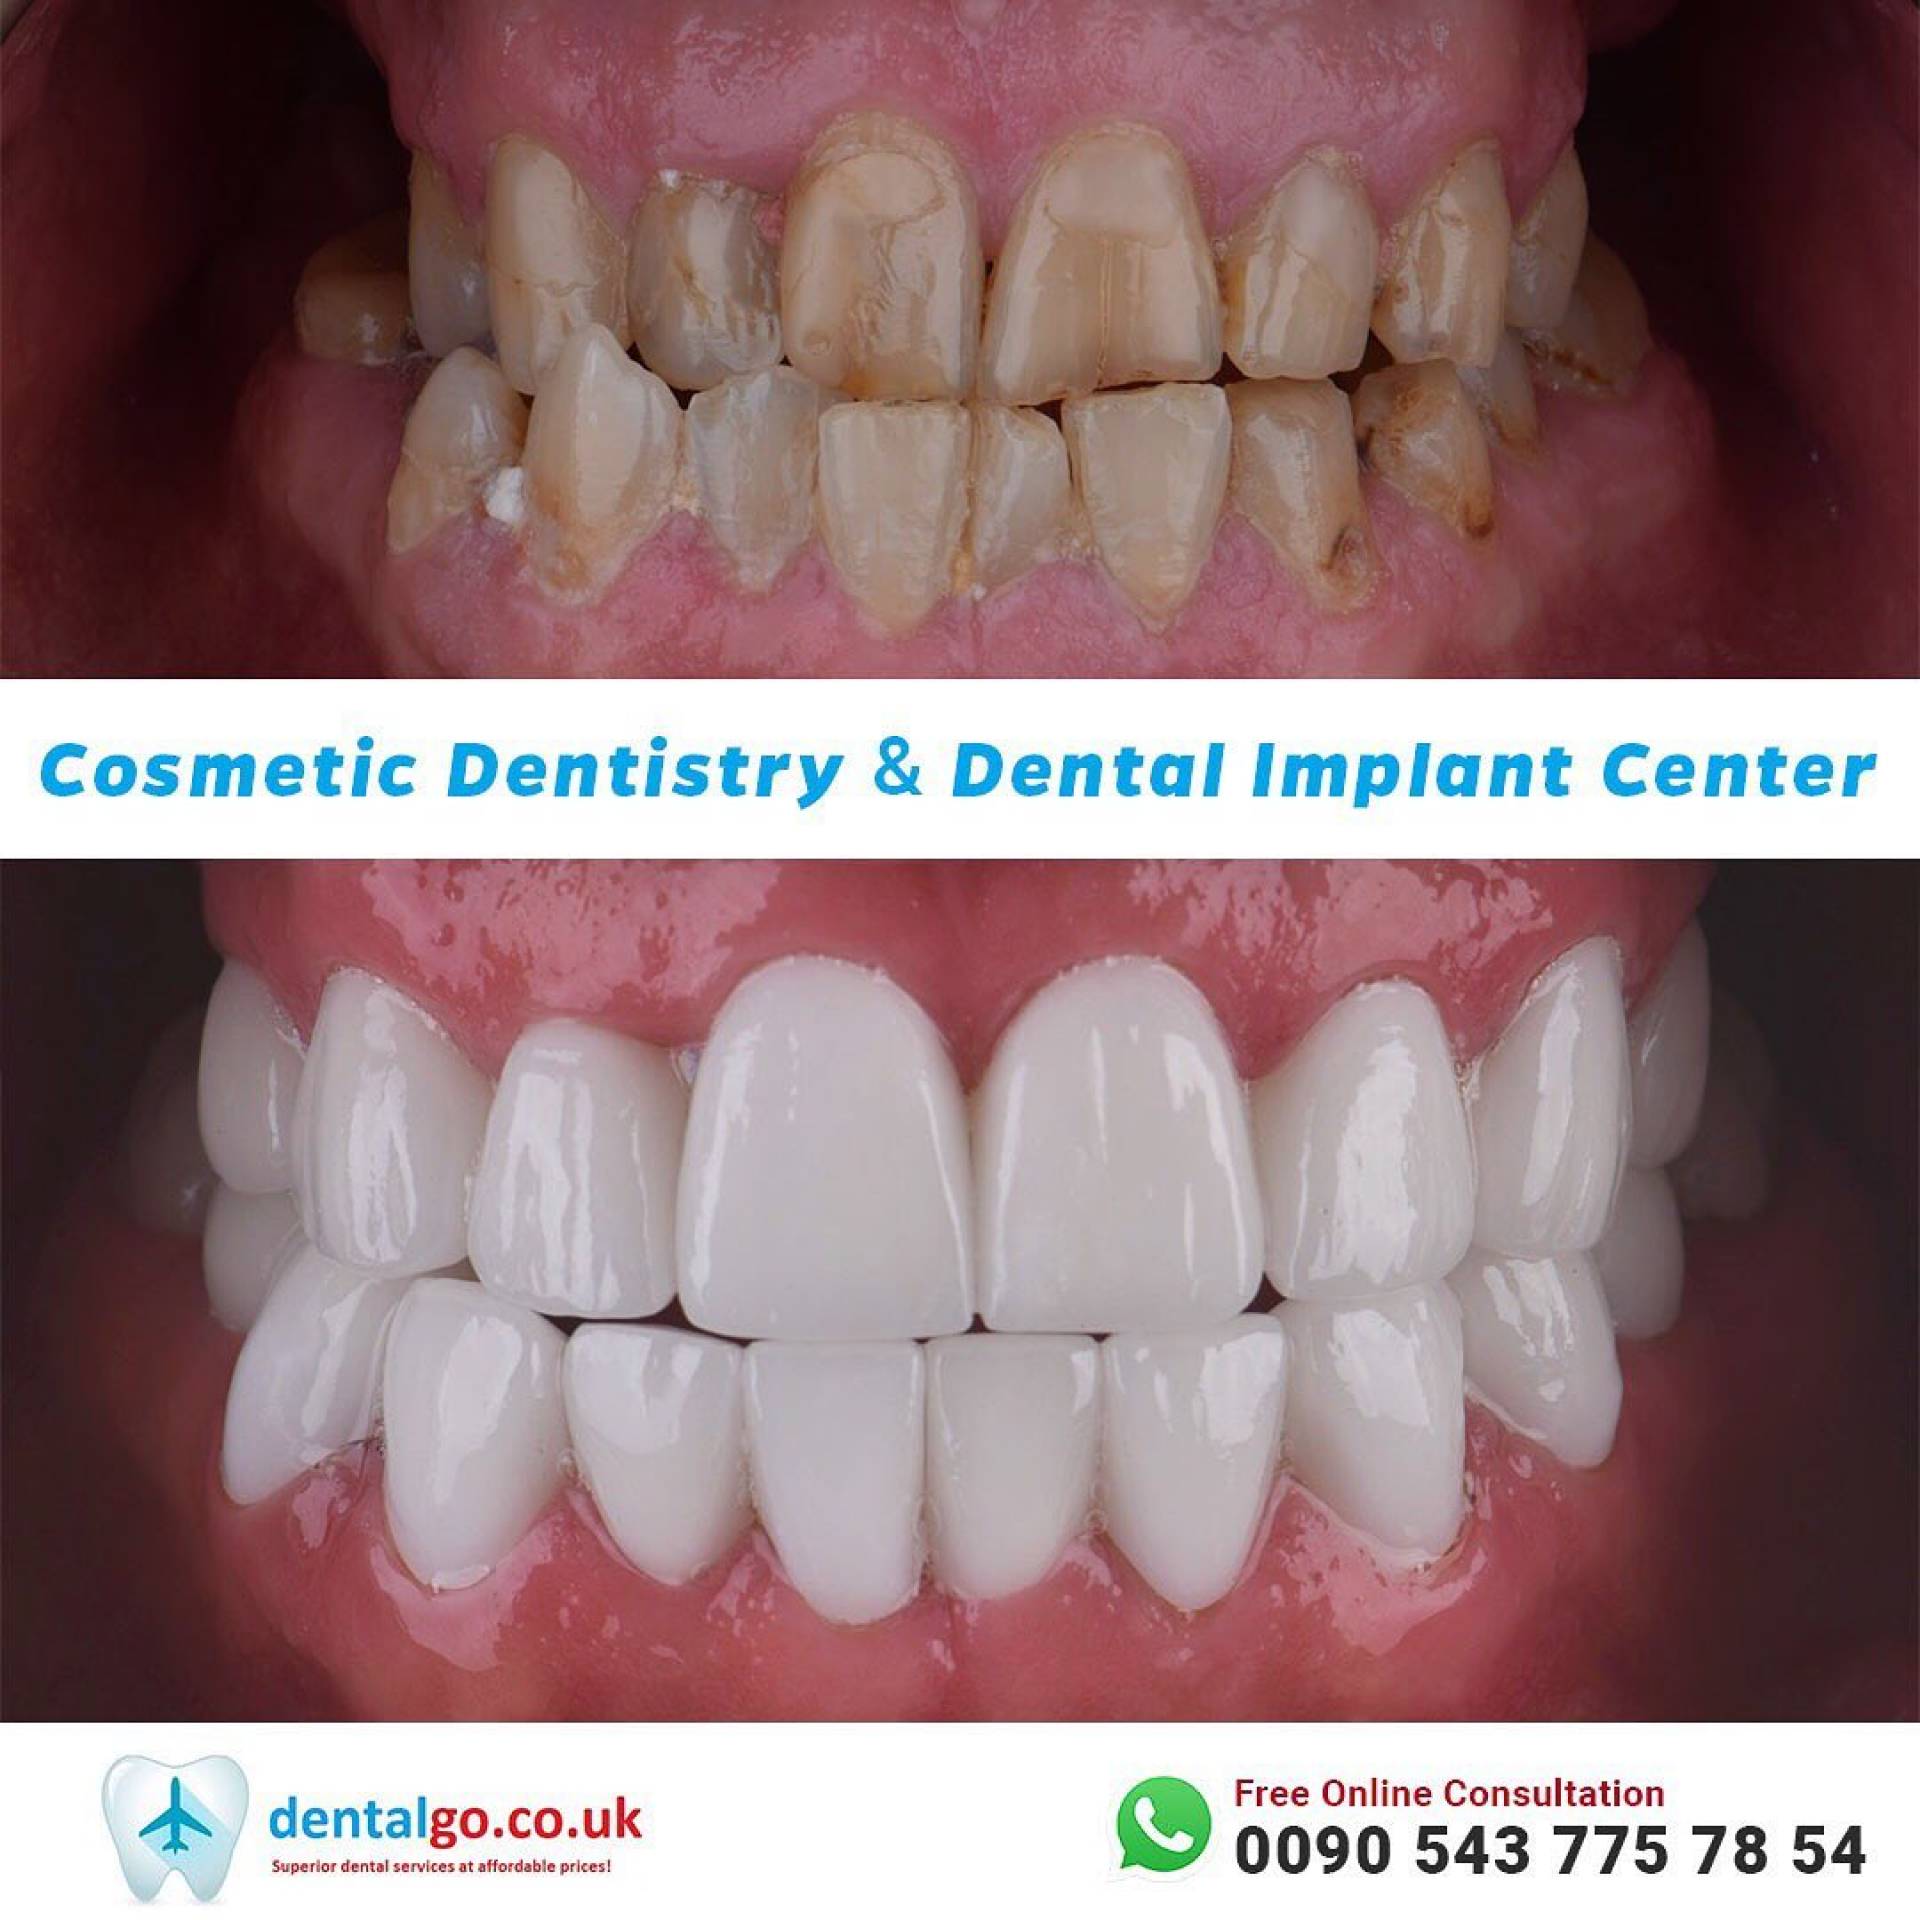 Dental smile perfection with zirconia crowns